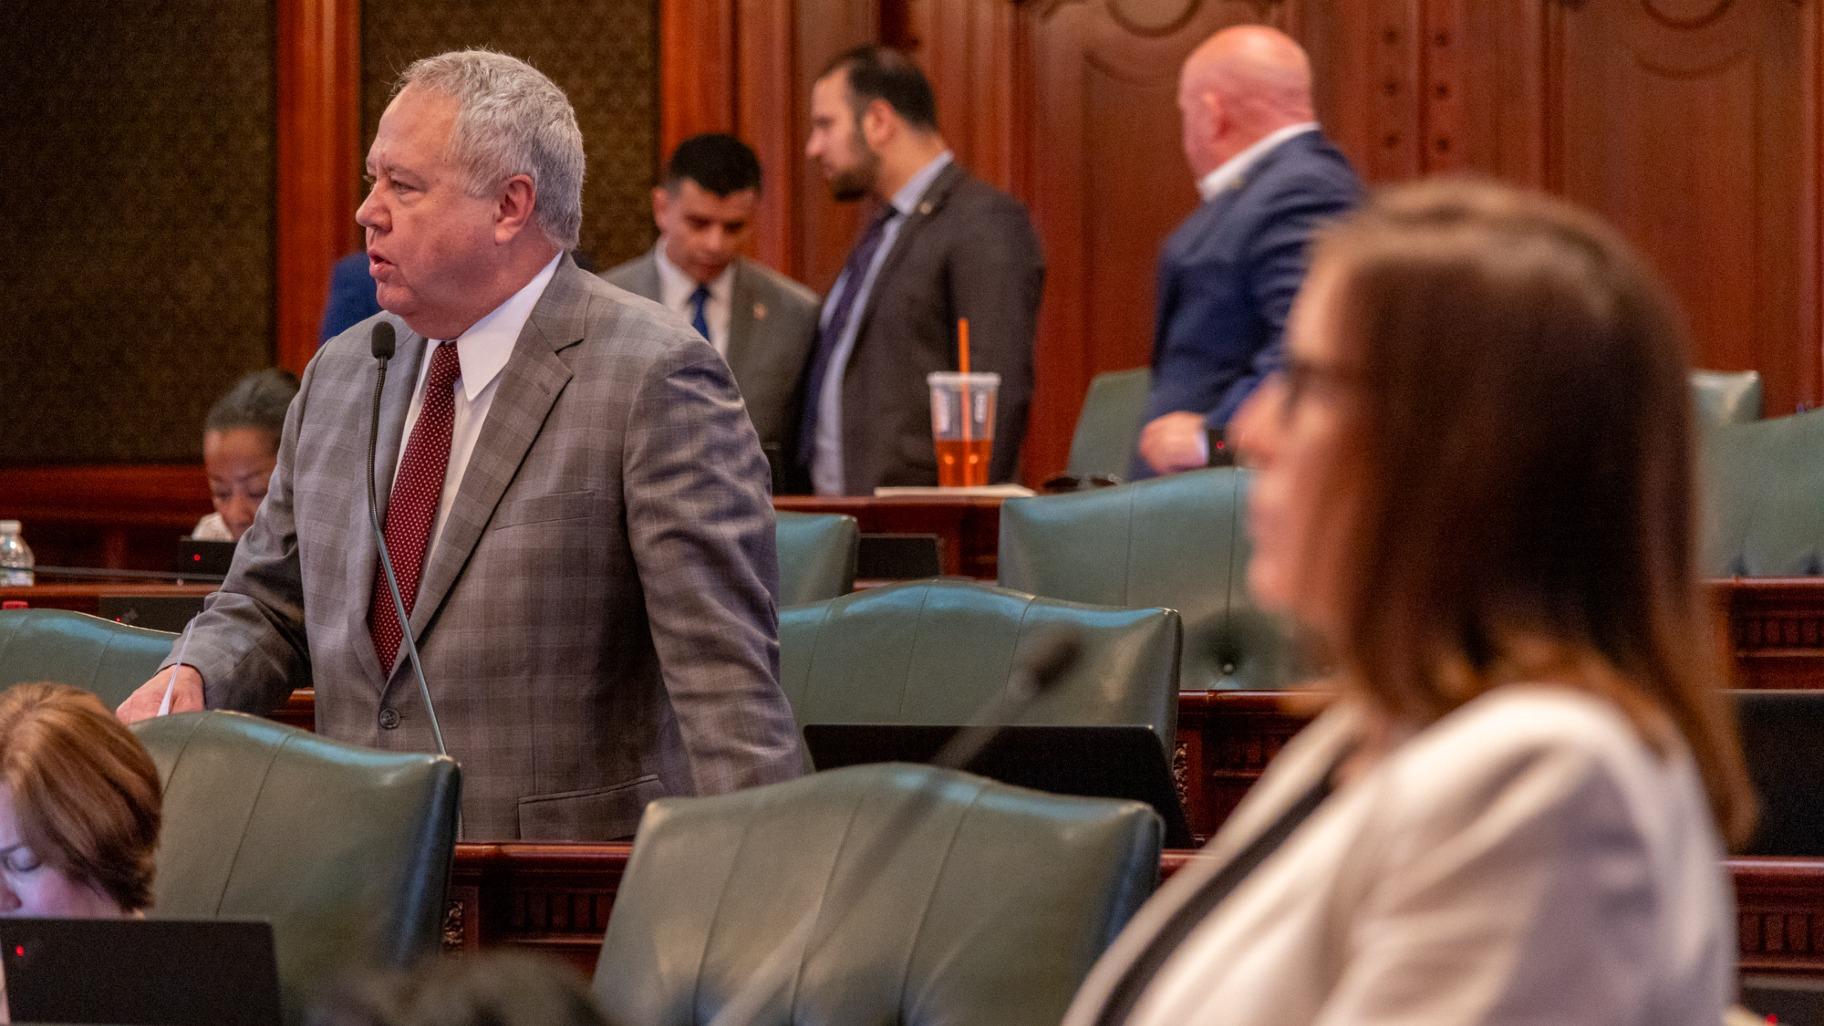 State Rep. Jay Hoffman, D-Swansea, argues in favor of a bill sponsored by state Rep. Ann Williams, D-Chicago, after introducing a competing bill earlier this year. (Andrew Adams / Capitol News Illinois)